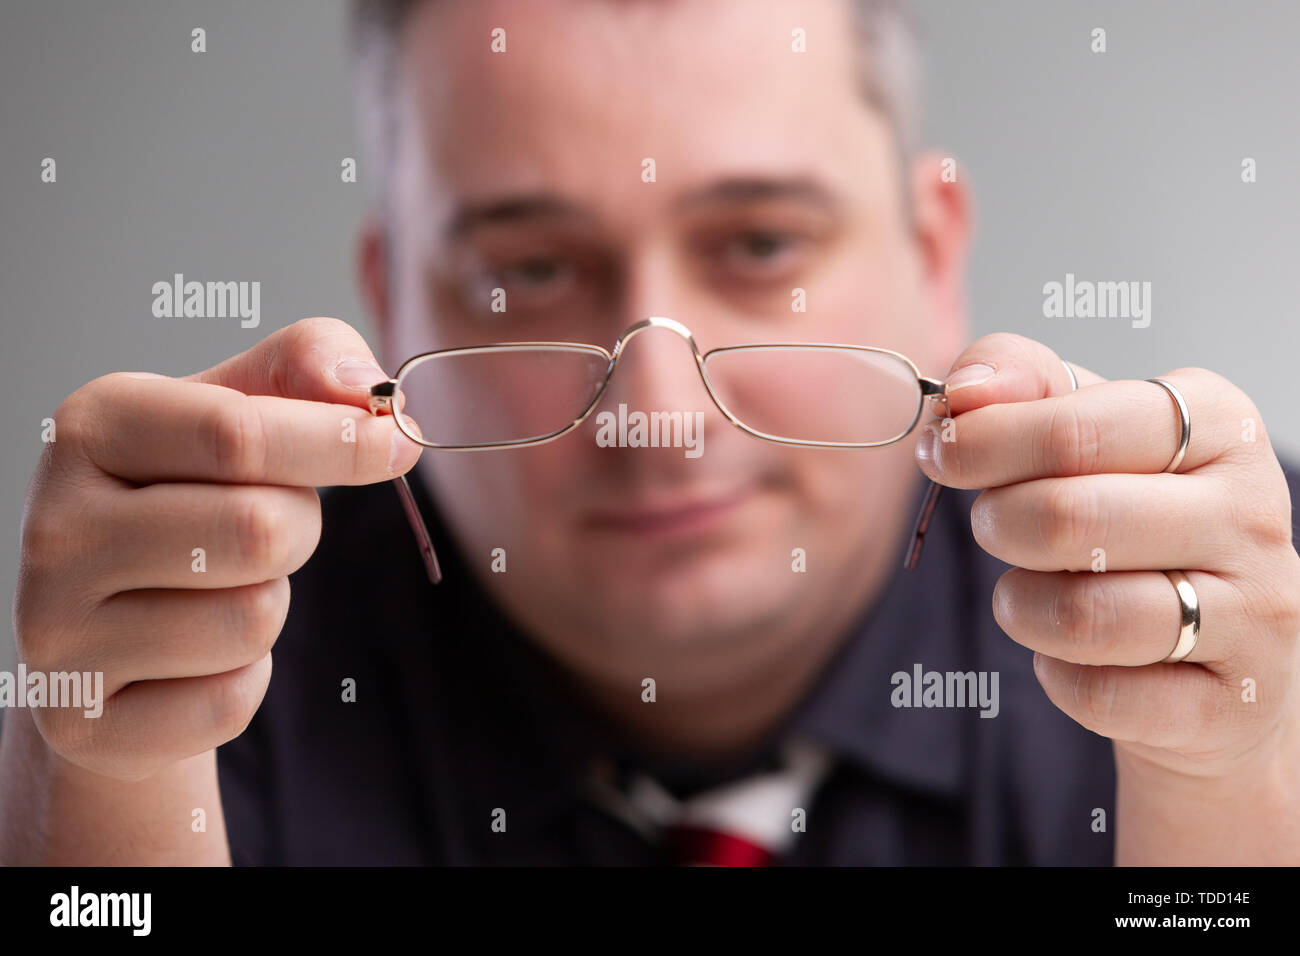 Businessman holding a pair of eyeglasses with metal frames in his hands with a thoughtful expression, selective focus to the spectacles Stock Photo